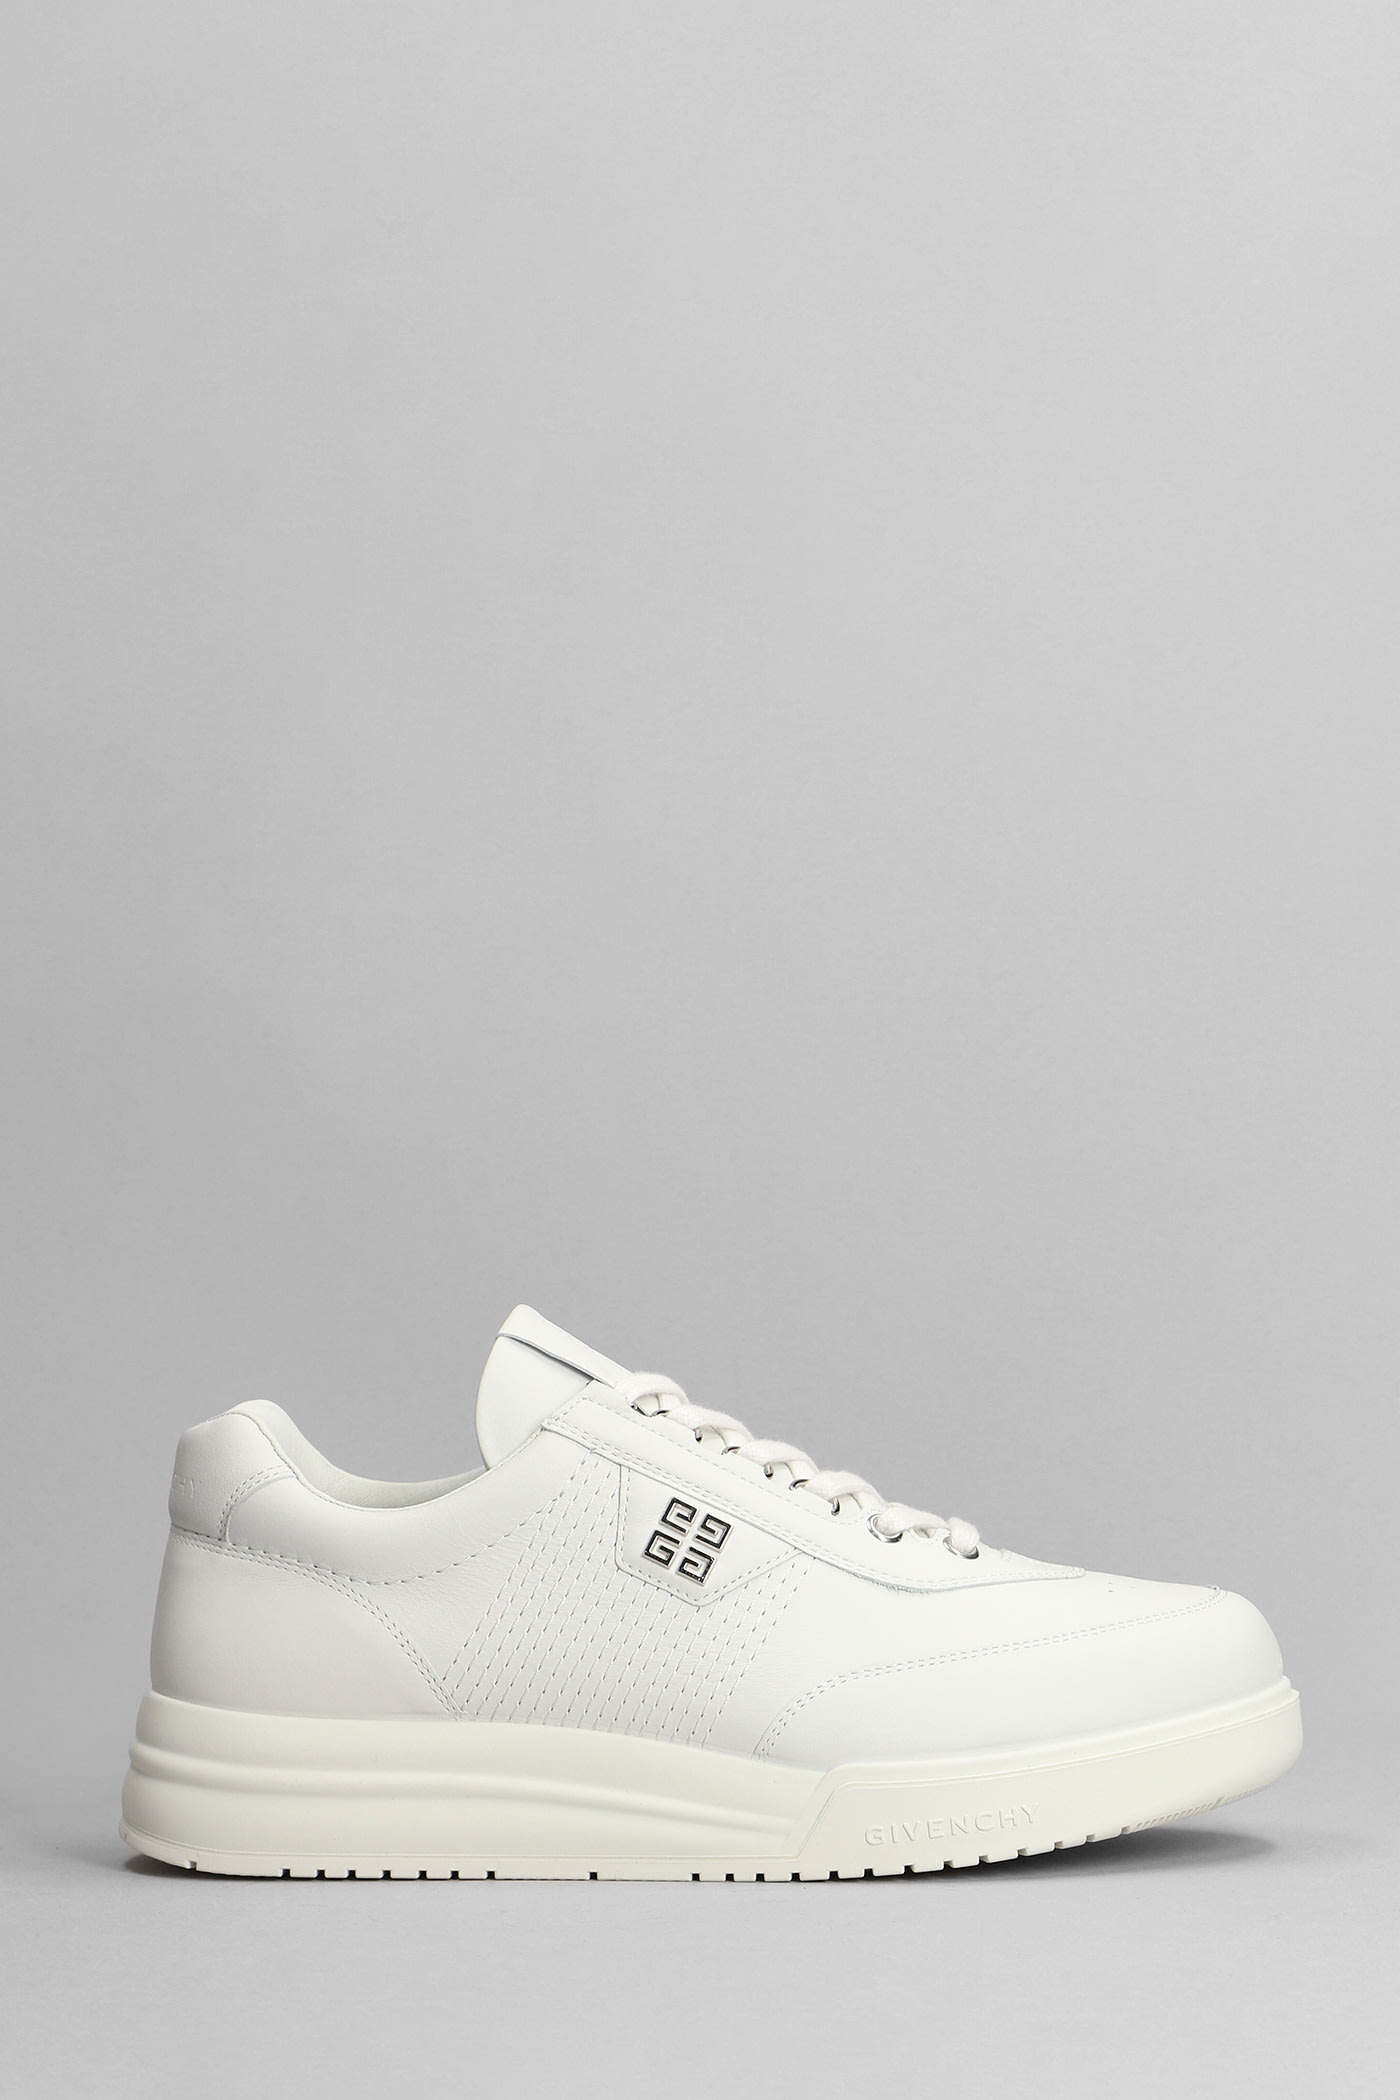 GIVENCHY G4 LOW TOP SNEAKERS IN WHITE LEATHER